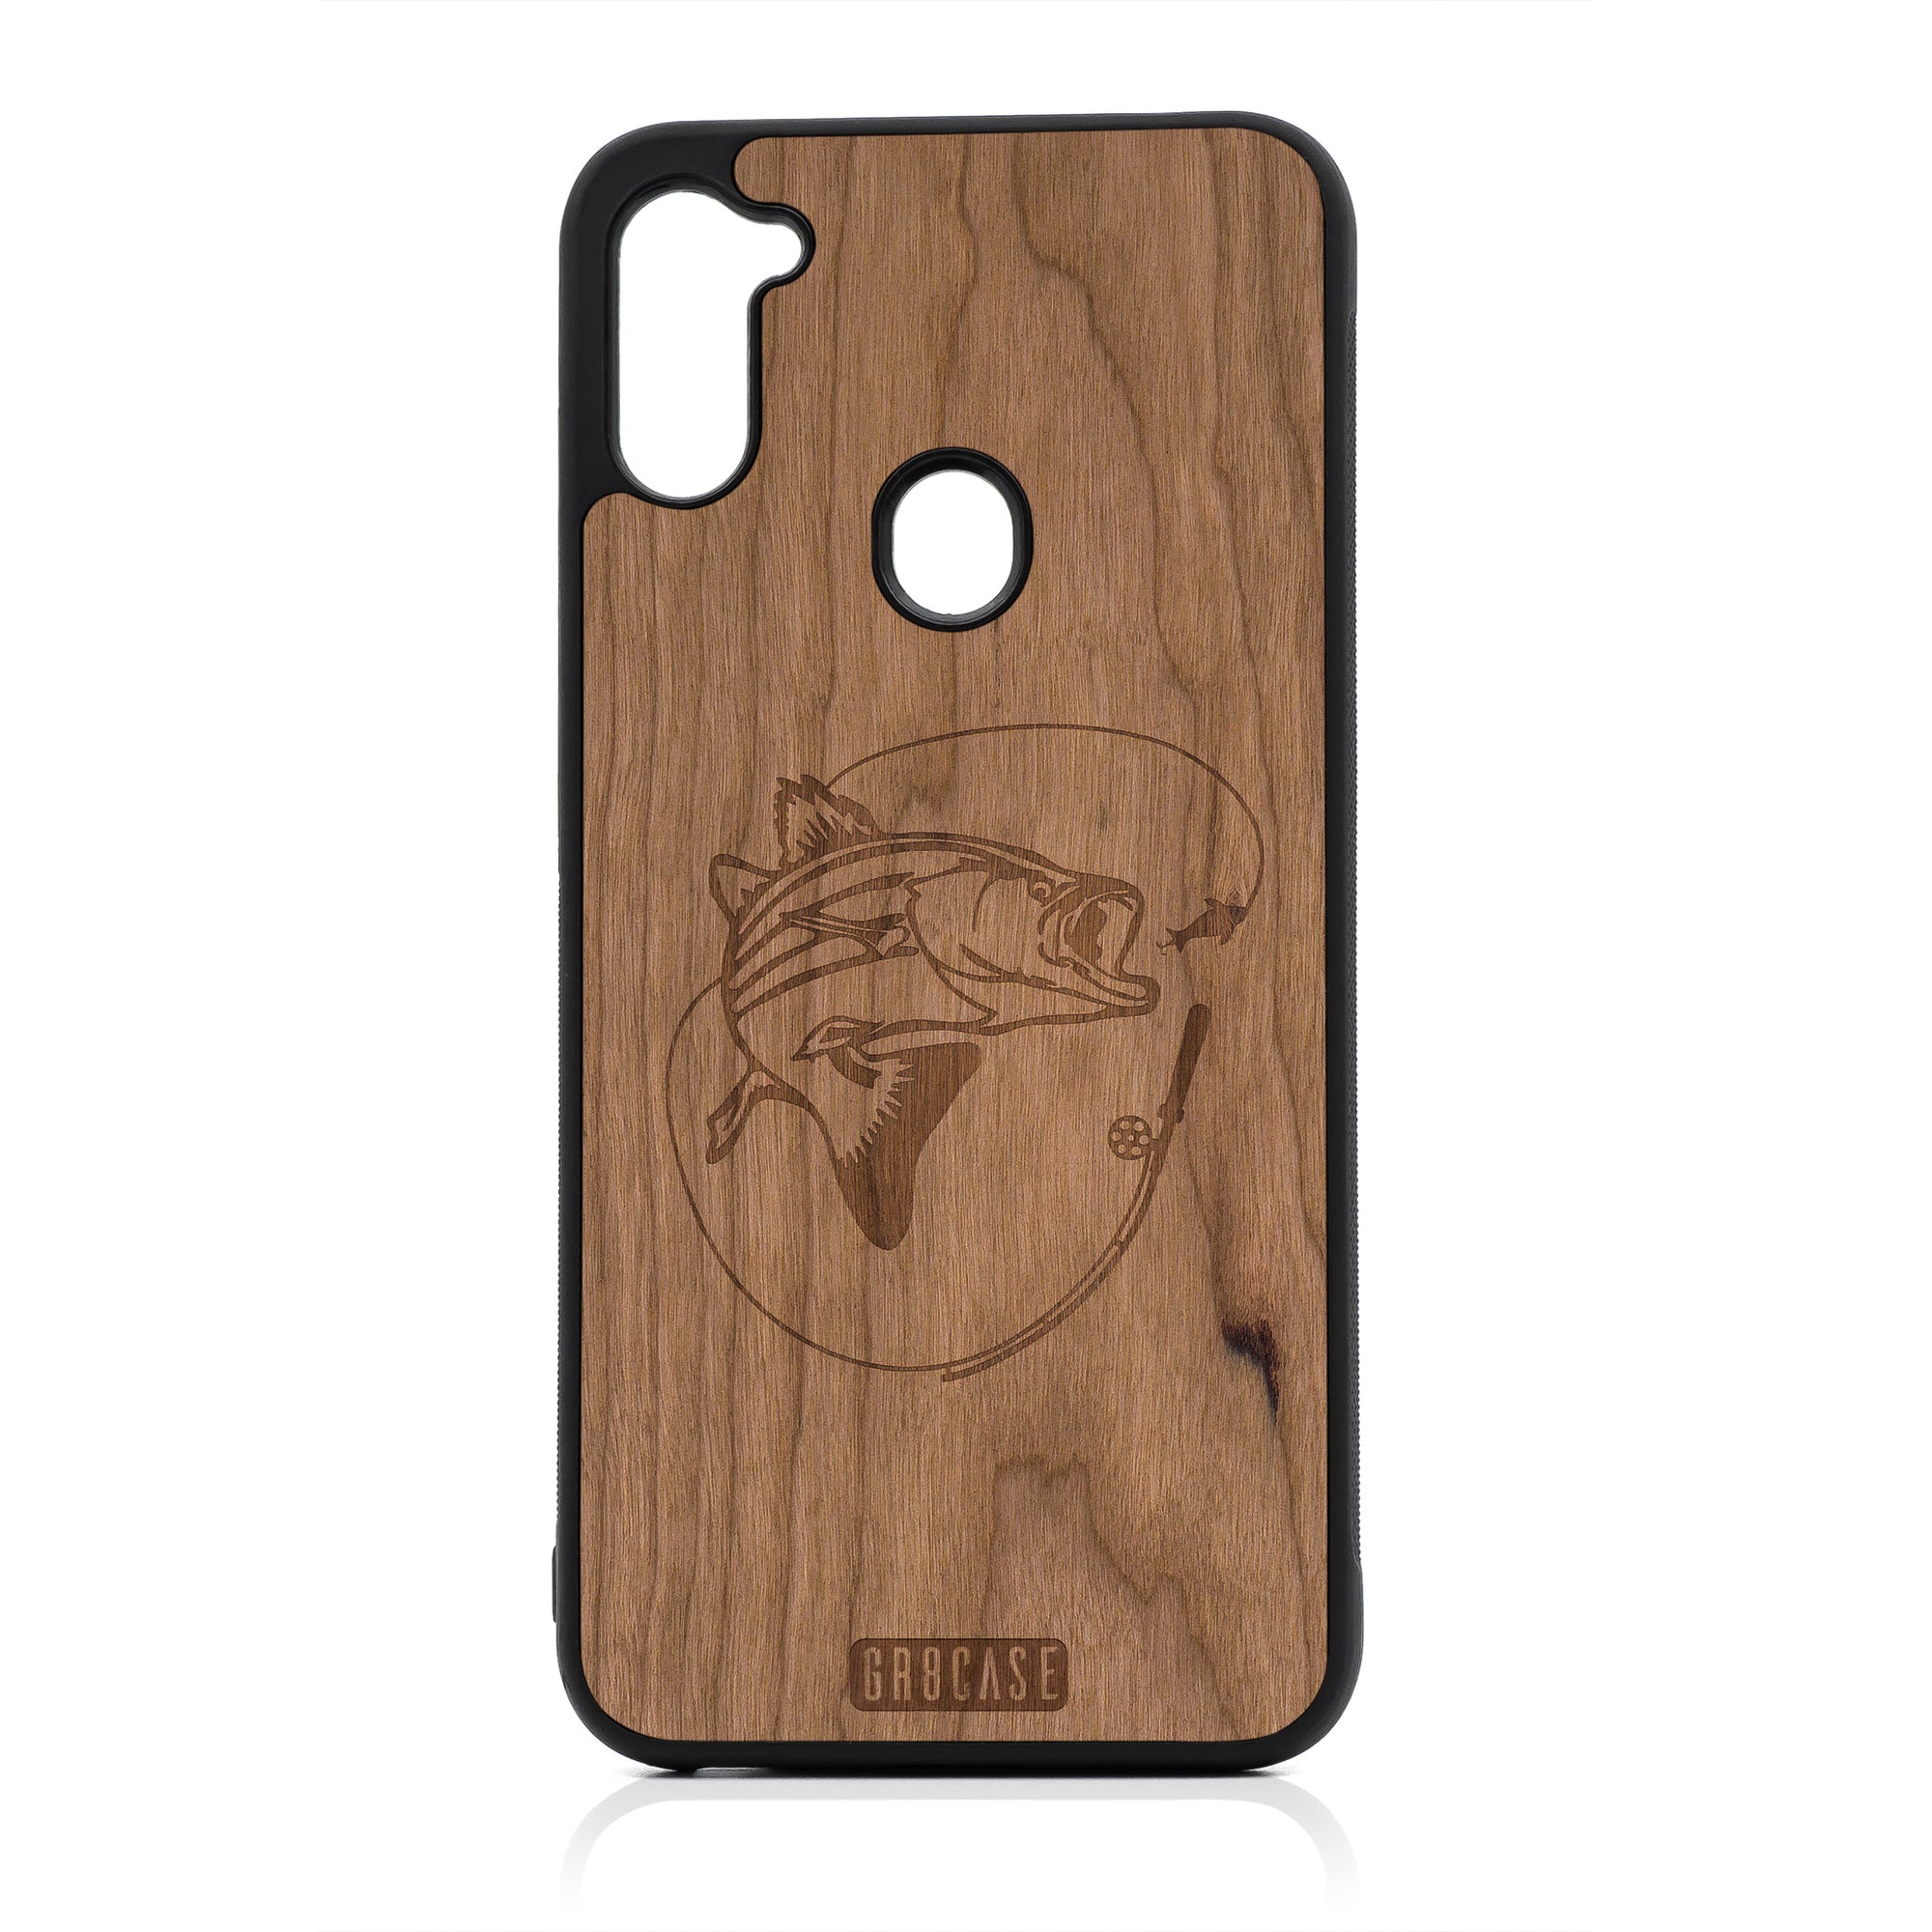 Fish and Reel Design Wood Case For Samsung Galaxy A11